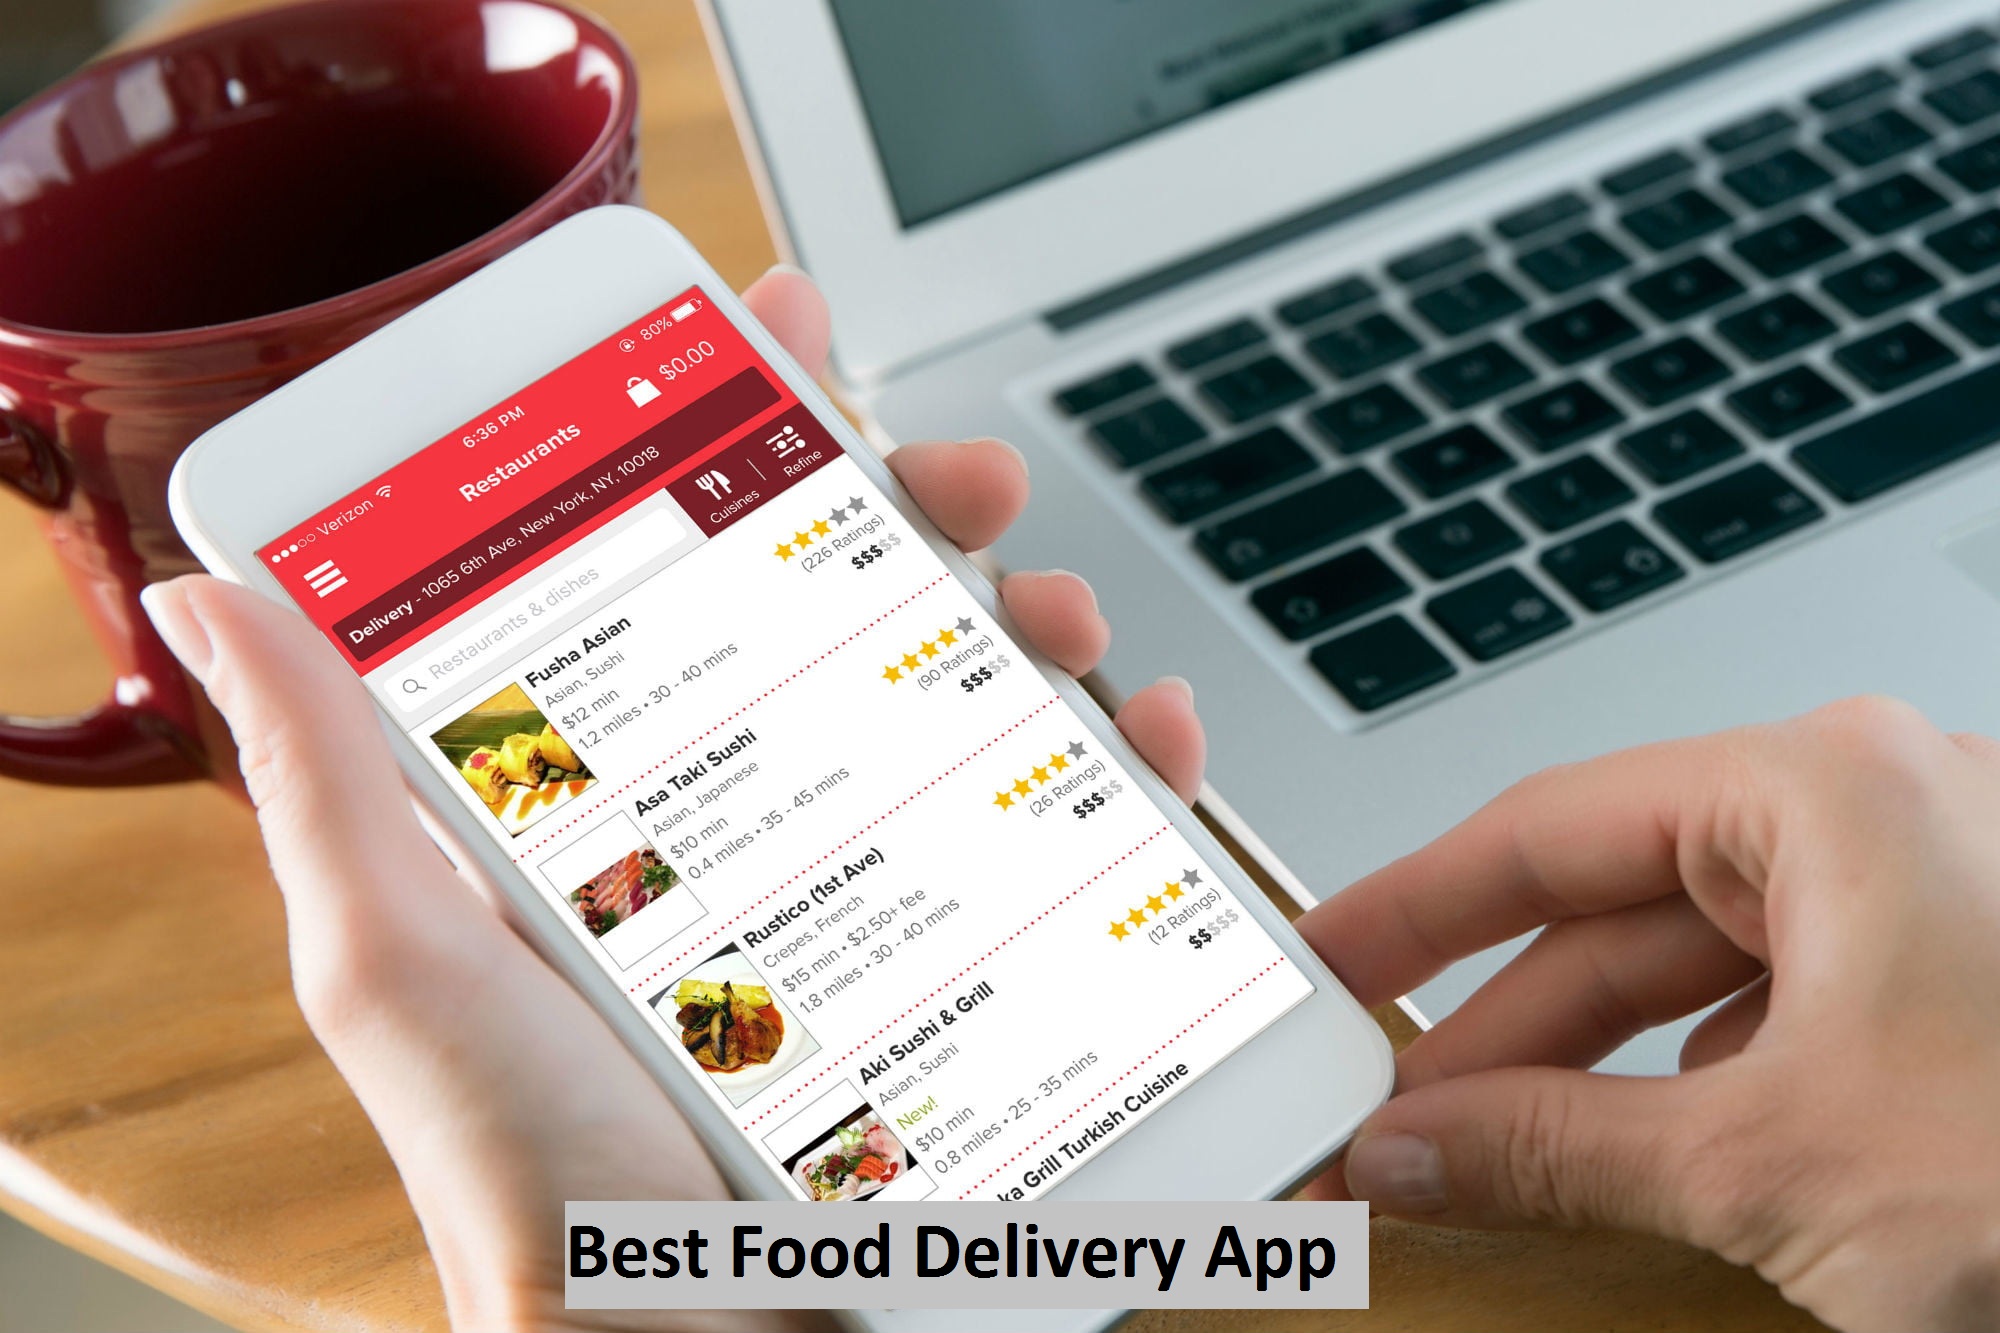 Which food delivery app is best and why should to choose